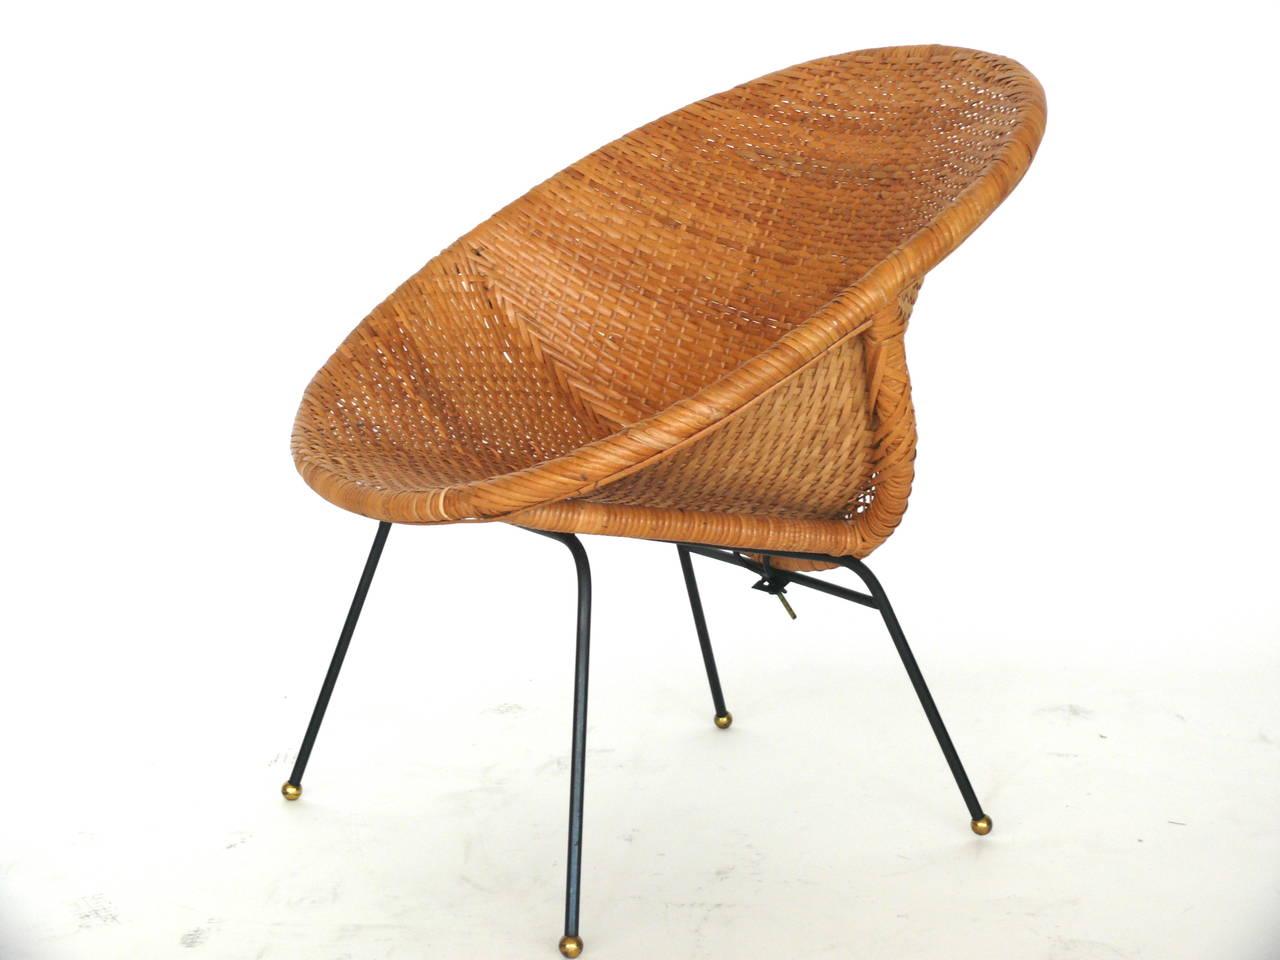 Woven Wicker and Iron Bucket Chairs 2